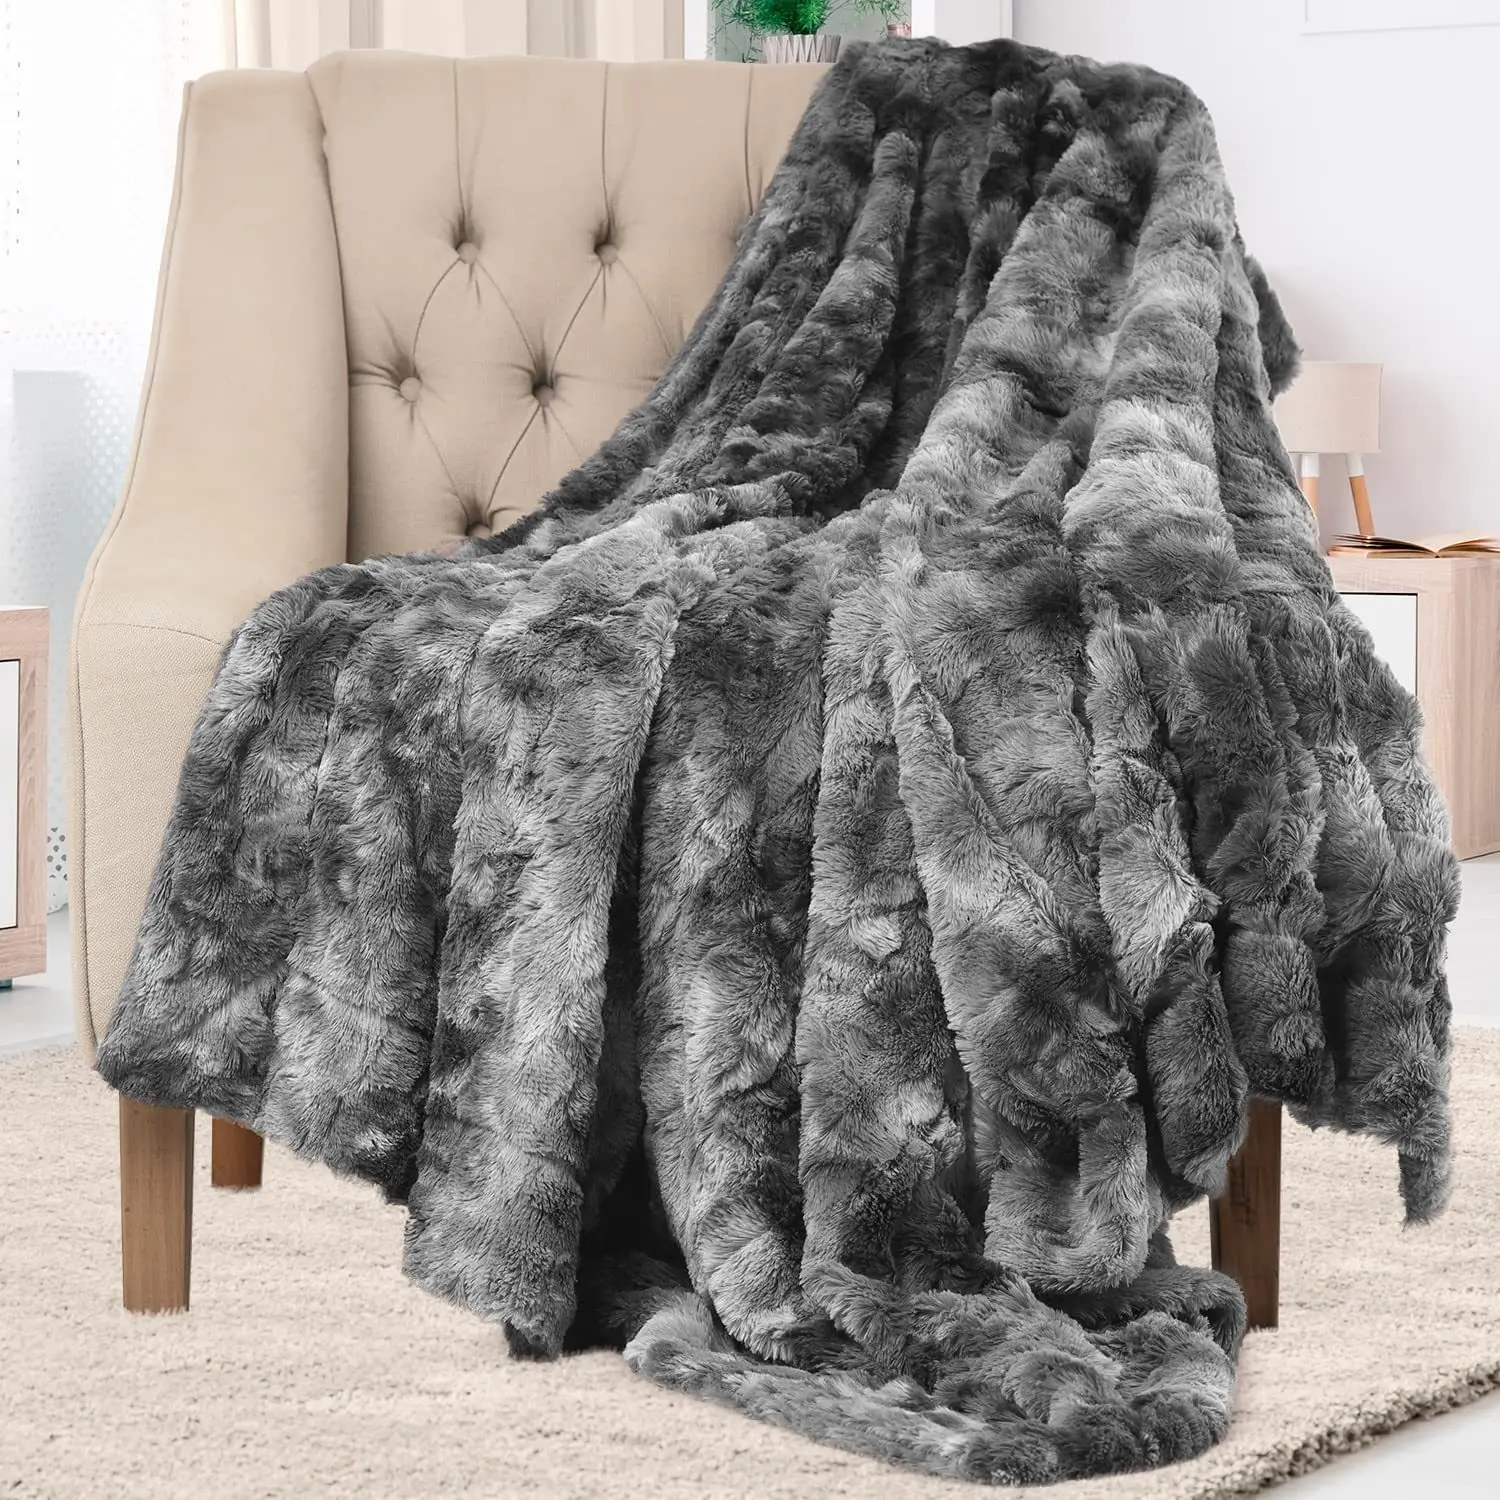 

Fuzzy Blanket for Couch - Grey, Soft and Comfy Sherpa, Plush and Furry Faux Fur, Reversible Throw Blankets for Sofa and Bed